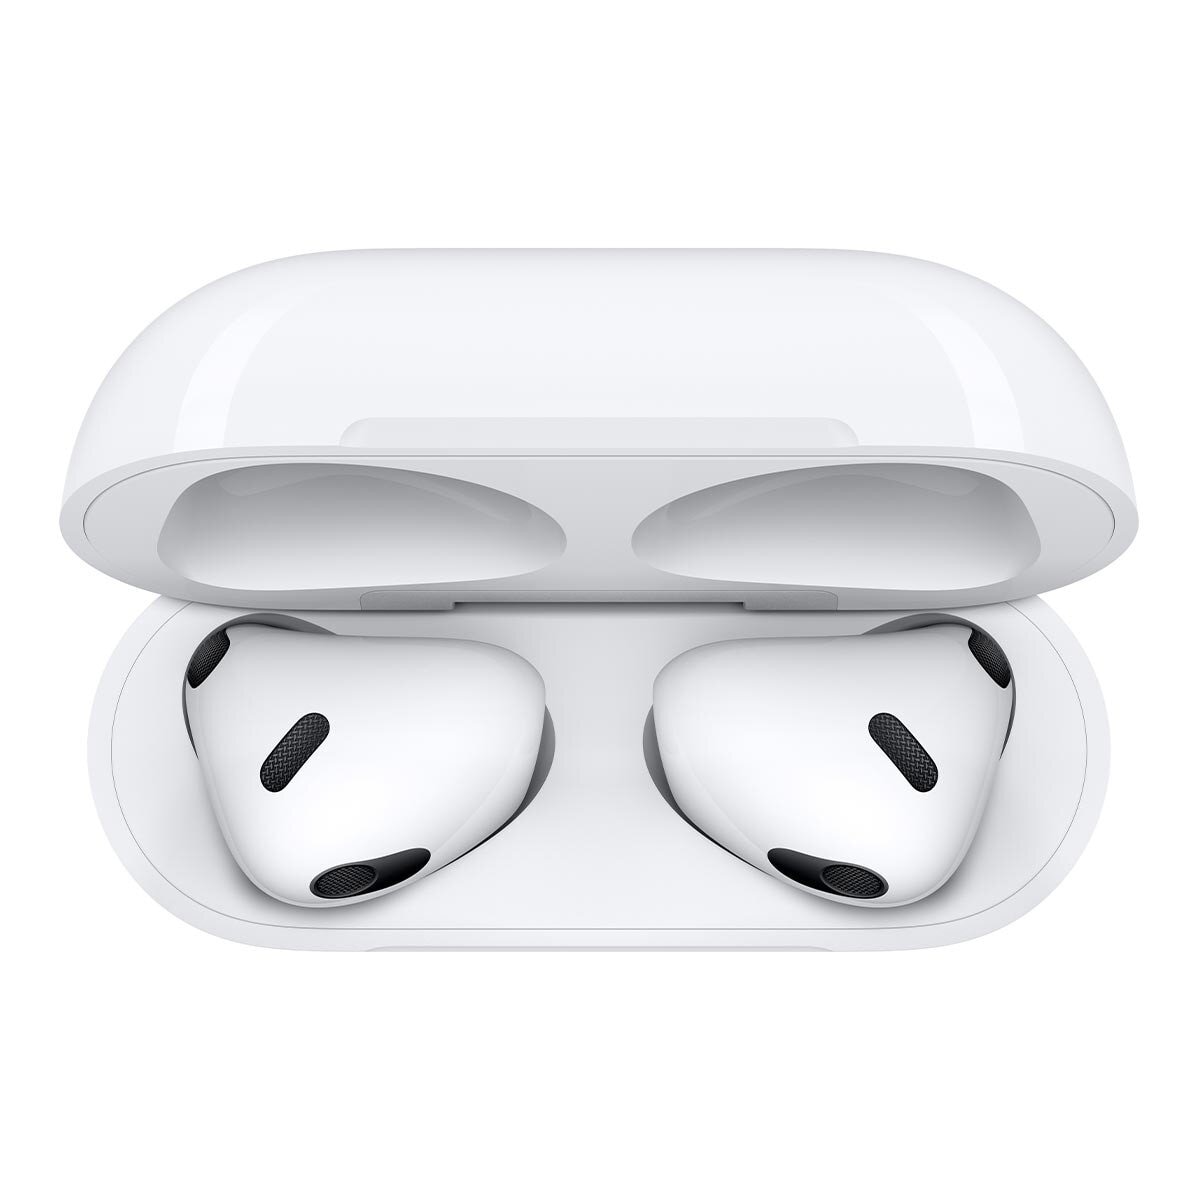 Apple AirPods (第 3 代)